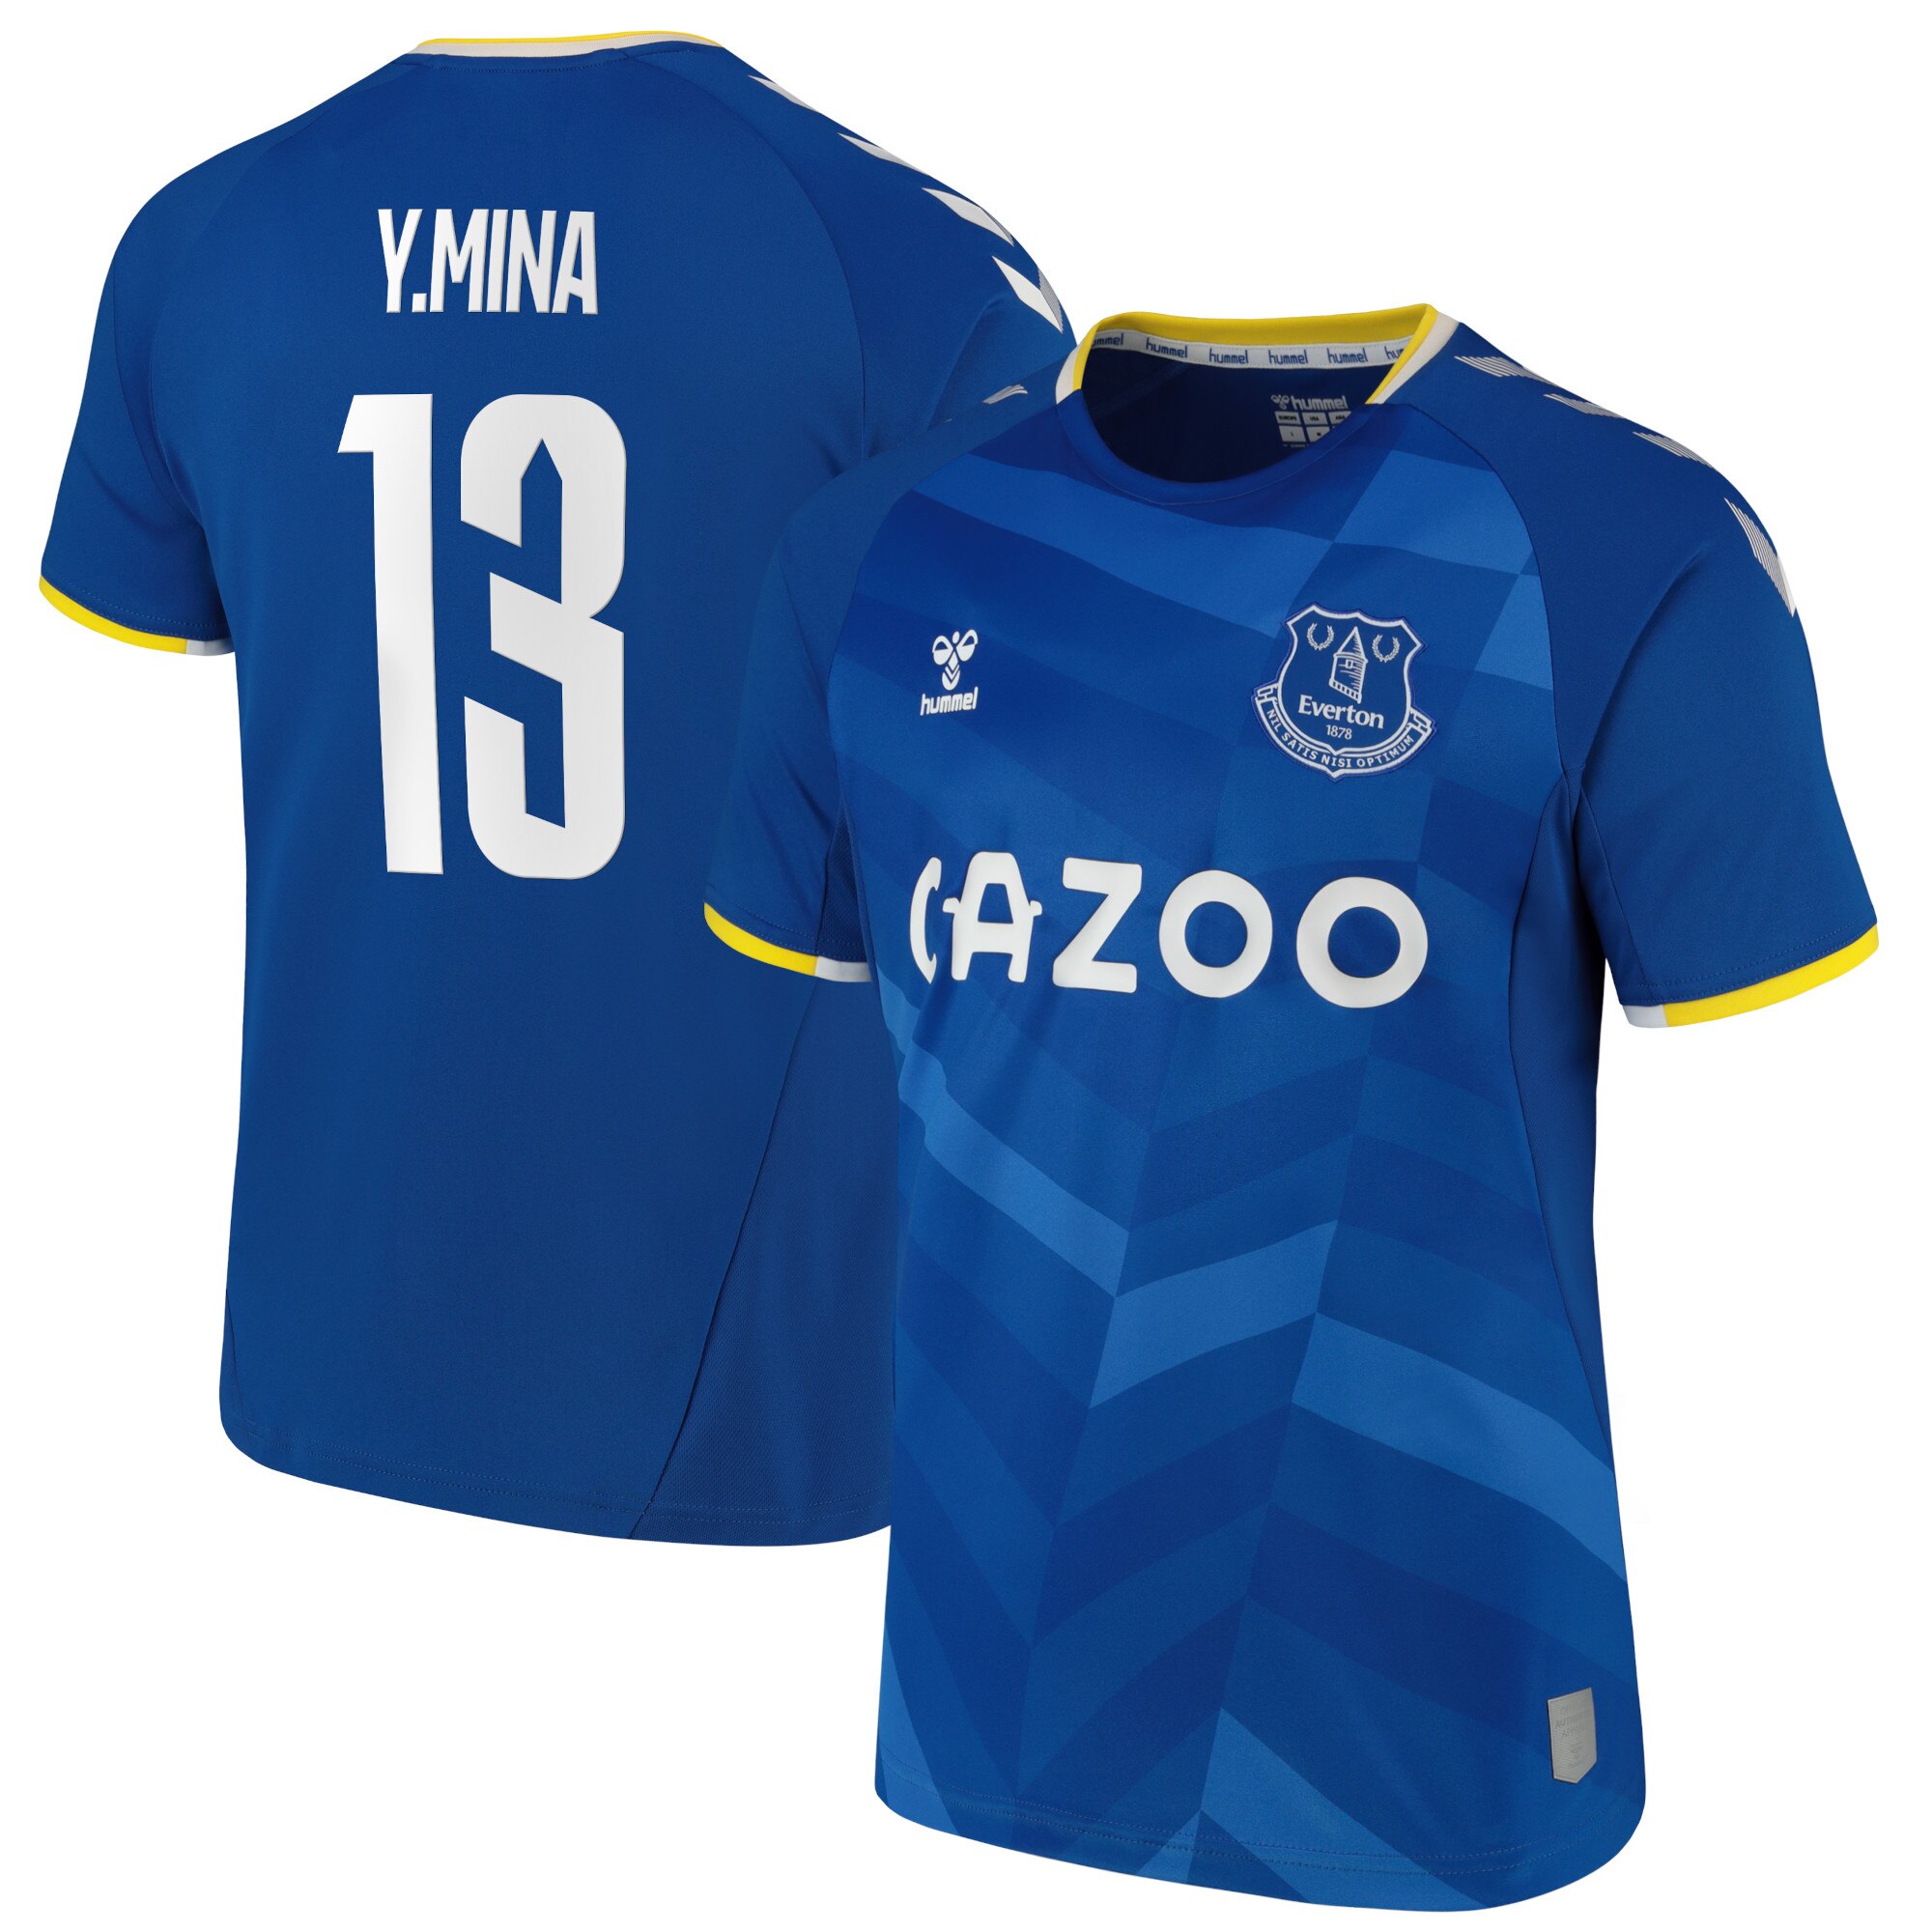 Everton Cup Home Shirt - 2021-22 with Y.Mina 13 printing